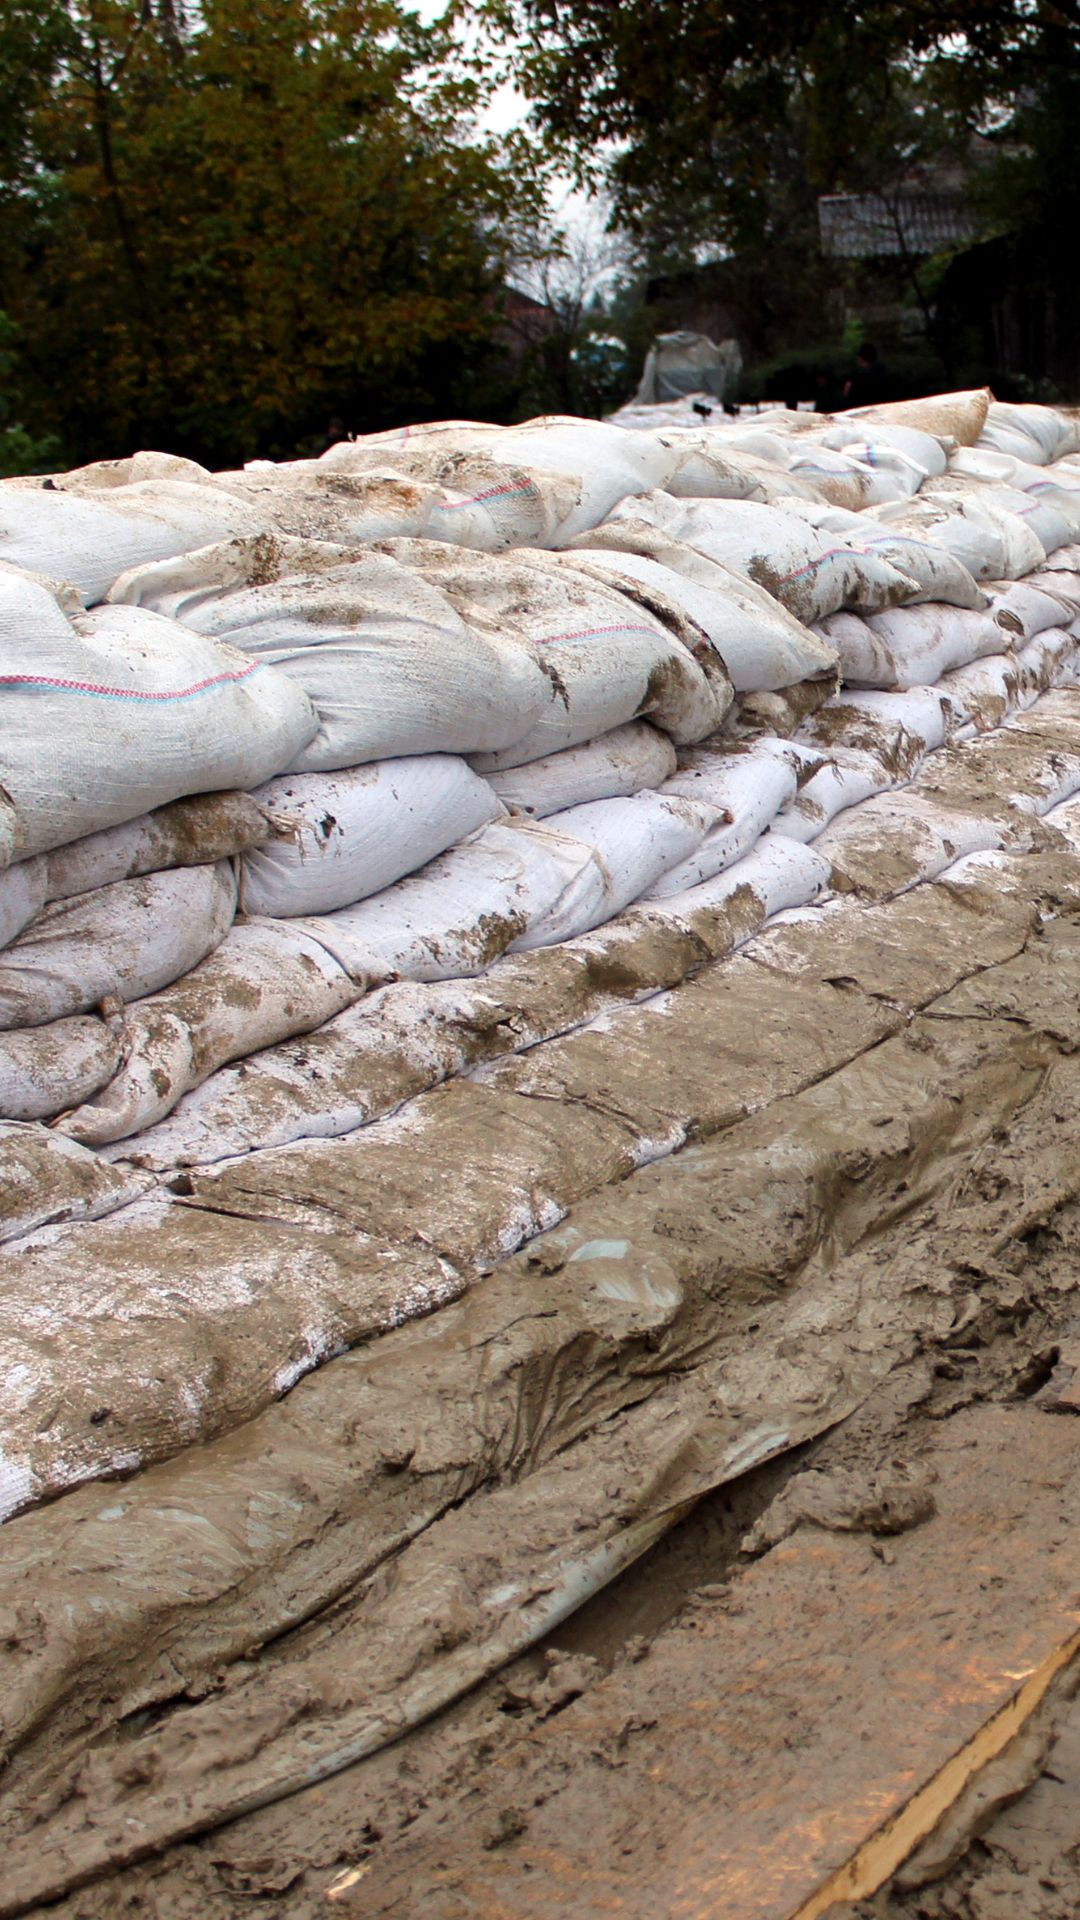 Sandbags are stacked in multiple rows and covered with mud on the bottom rows.